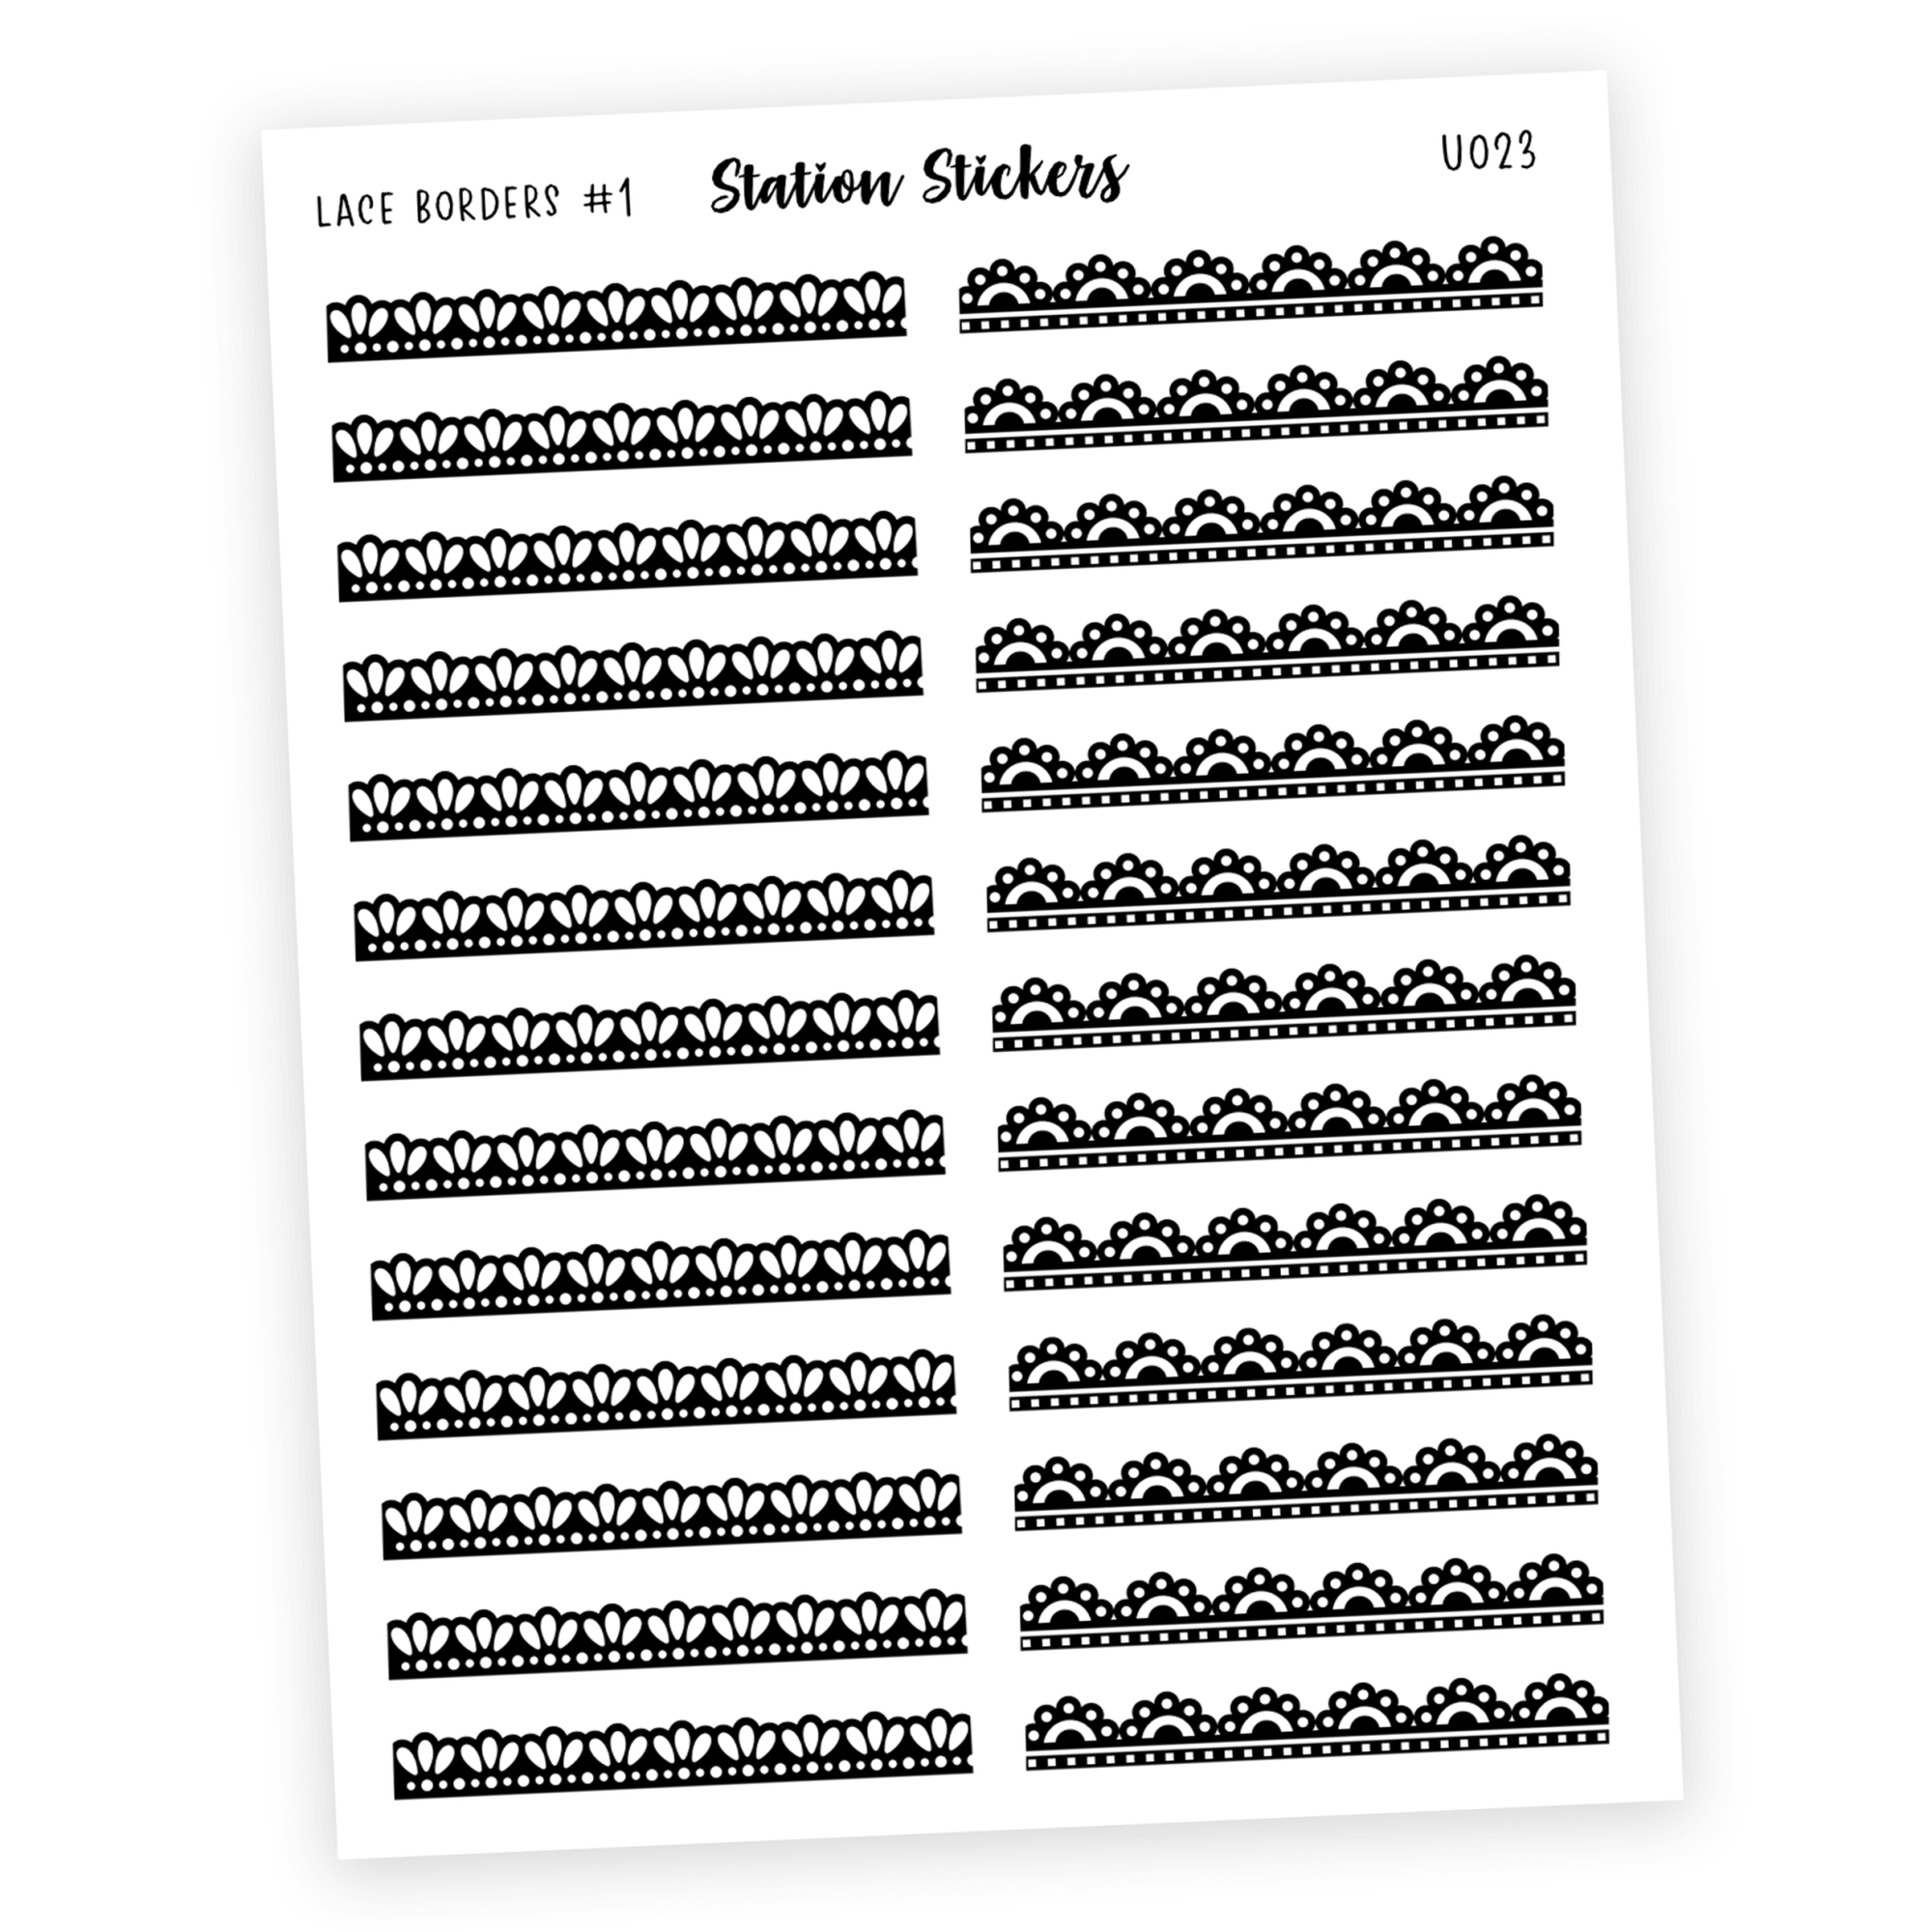 Borders • Lace #1 - Station Stickers